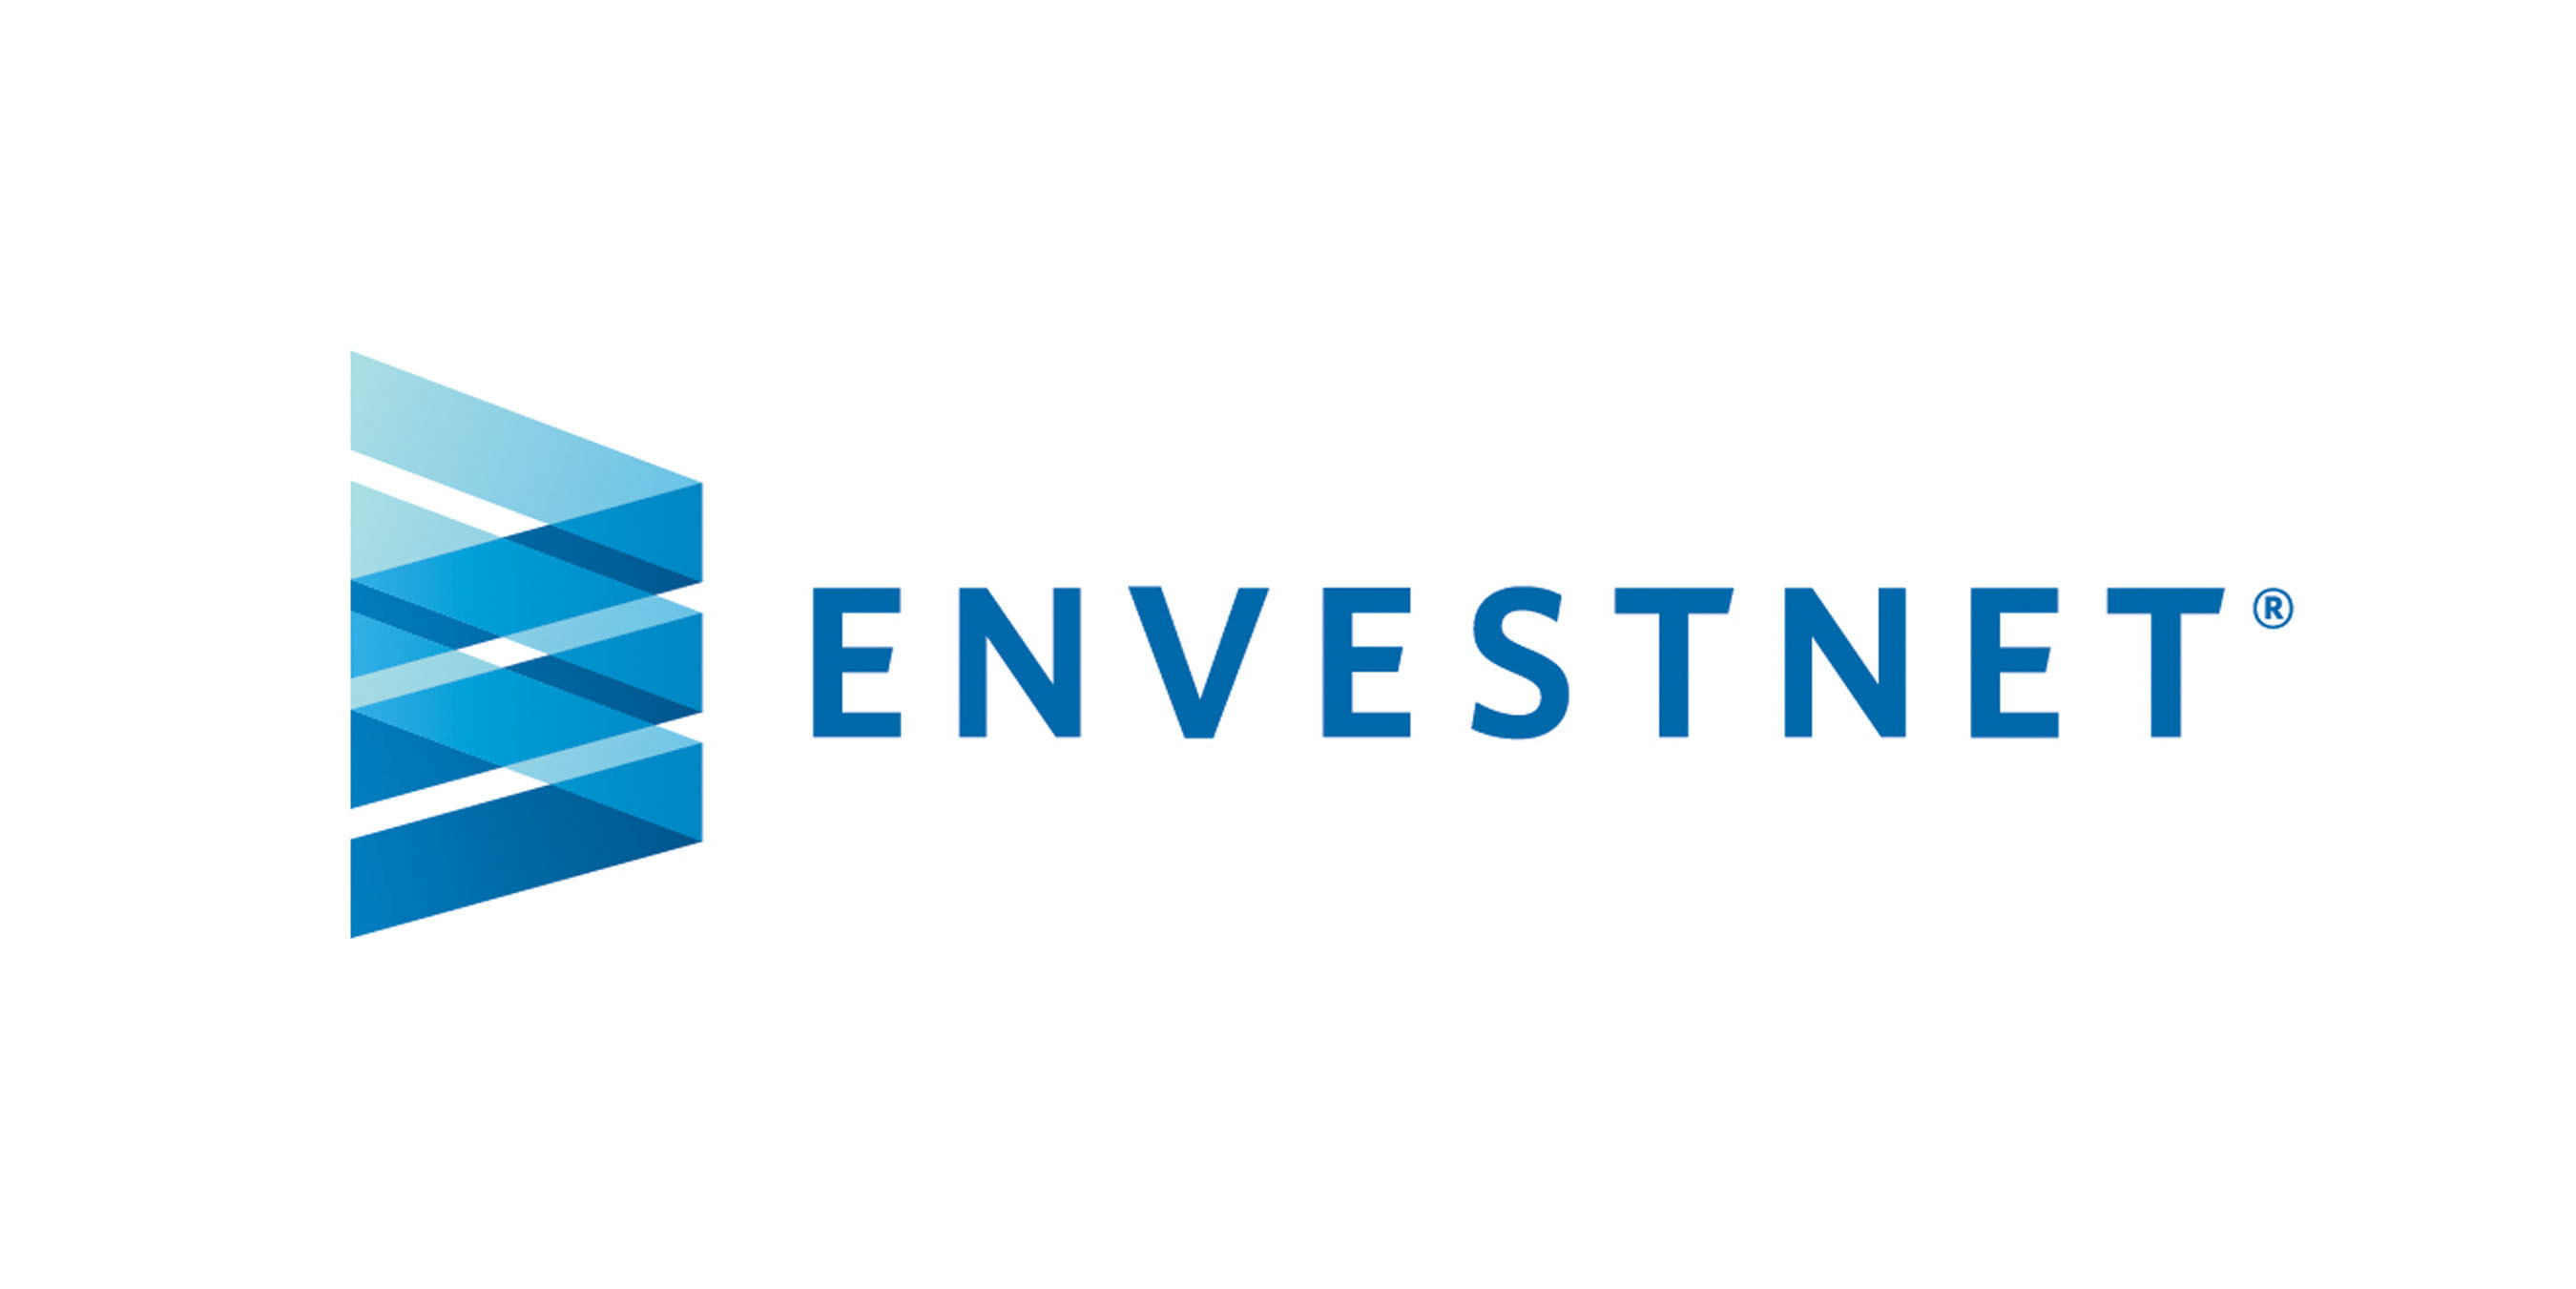 Envestnet, Inc. (NYSE: ENV) is a leading provider of unified wealth management technology and services to investment advisors. Our open-architecture platforms unify and fortify the wealth management process, delivering unparalleled flexibility, accuracy, performance and value. Envestnet solutions enable the transformation of wealth management into a transparent, independent, objective and fully-aligned standard of care, and empower advisors to deliver better outcomes. For more information on Envestnet...